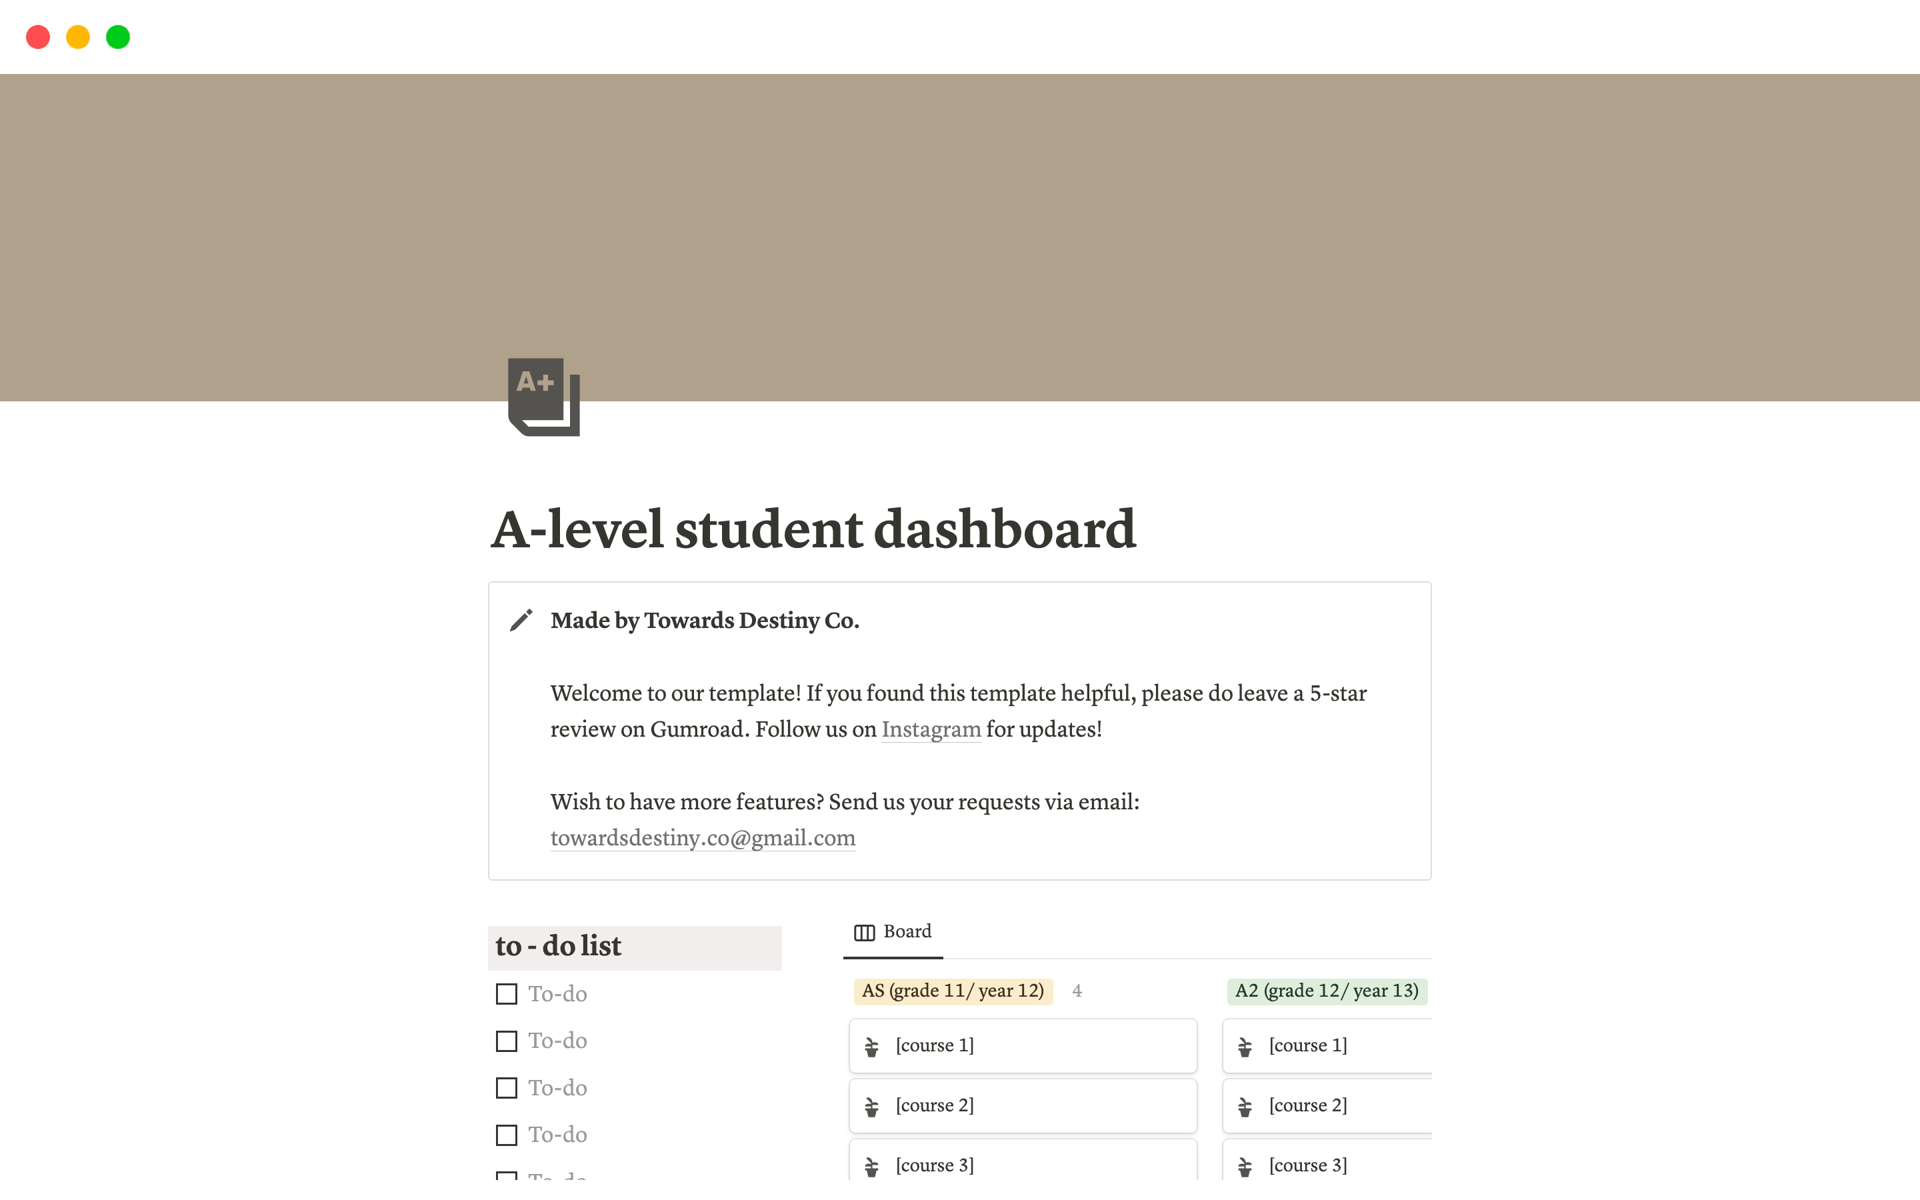 Introducing a pre-built template crafted to help A-level students manage their academic life. Simplify your student life by prioritizing your classes, notes, past- papers, and exams, empowering you to excel with ease.